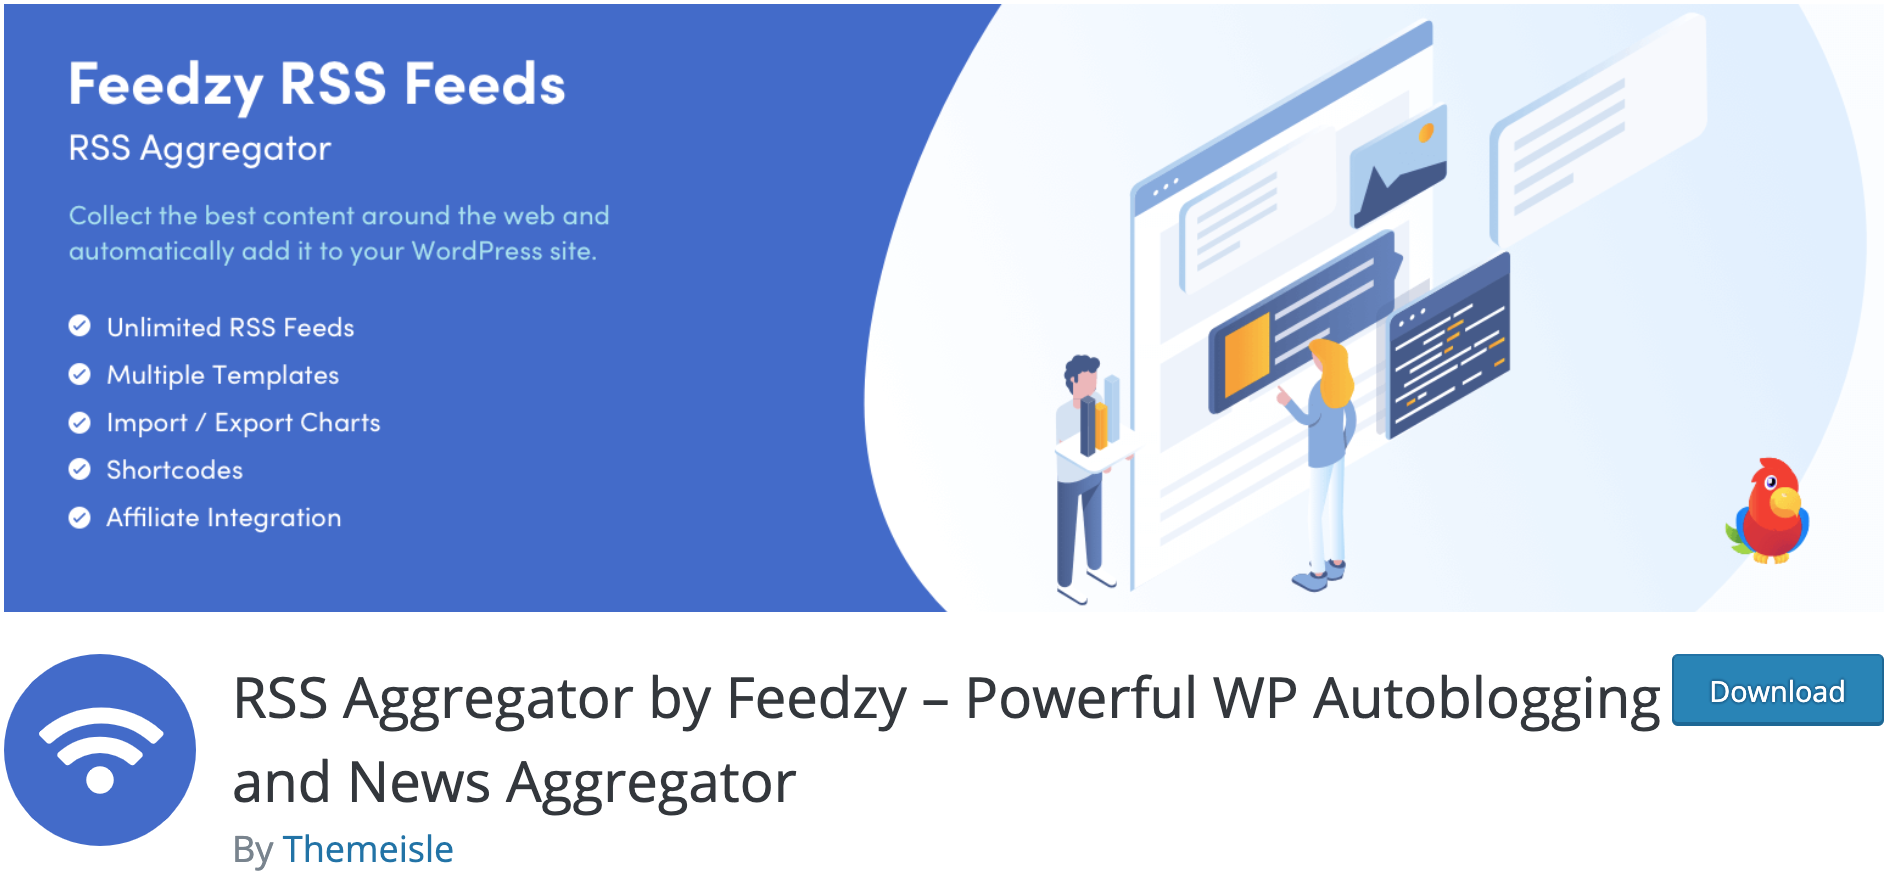 RSS Aggregator by Feedzy page to download the plugin